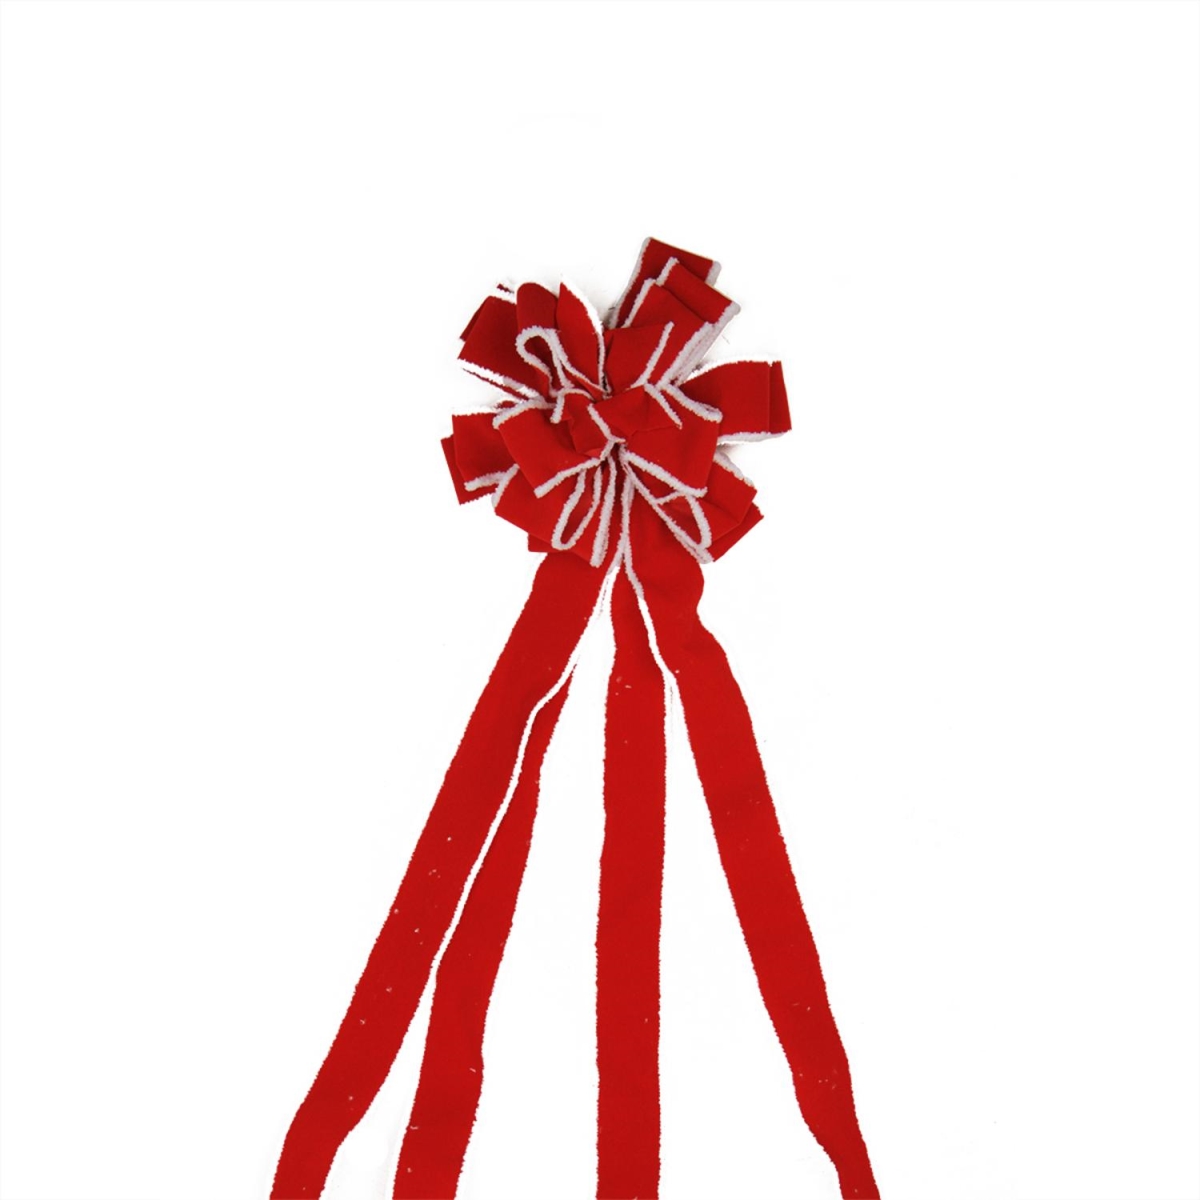 32264973 48 In. Red Velveteen With White Chenille Edges 16 Loop Christmas Tree Topper Bow Decoration